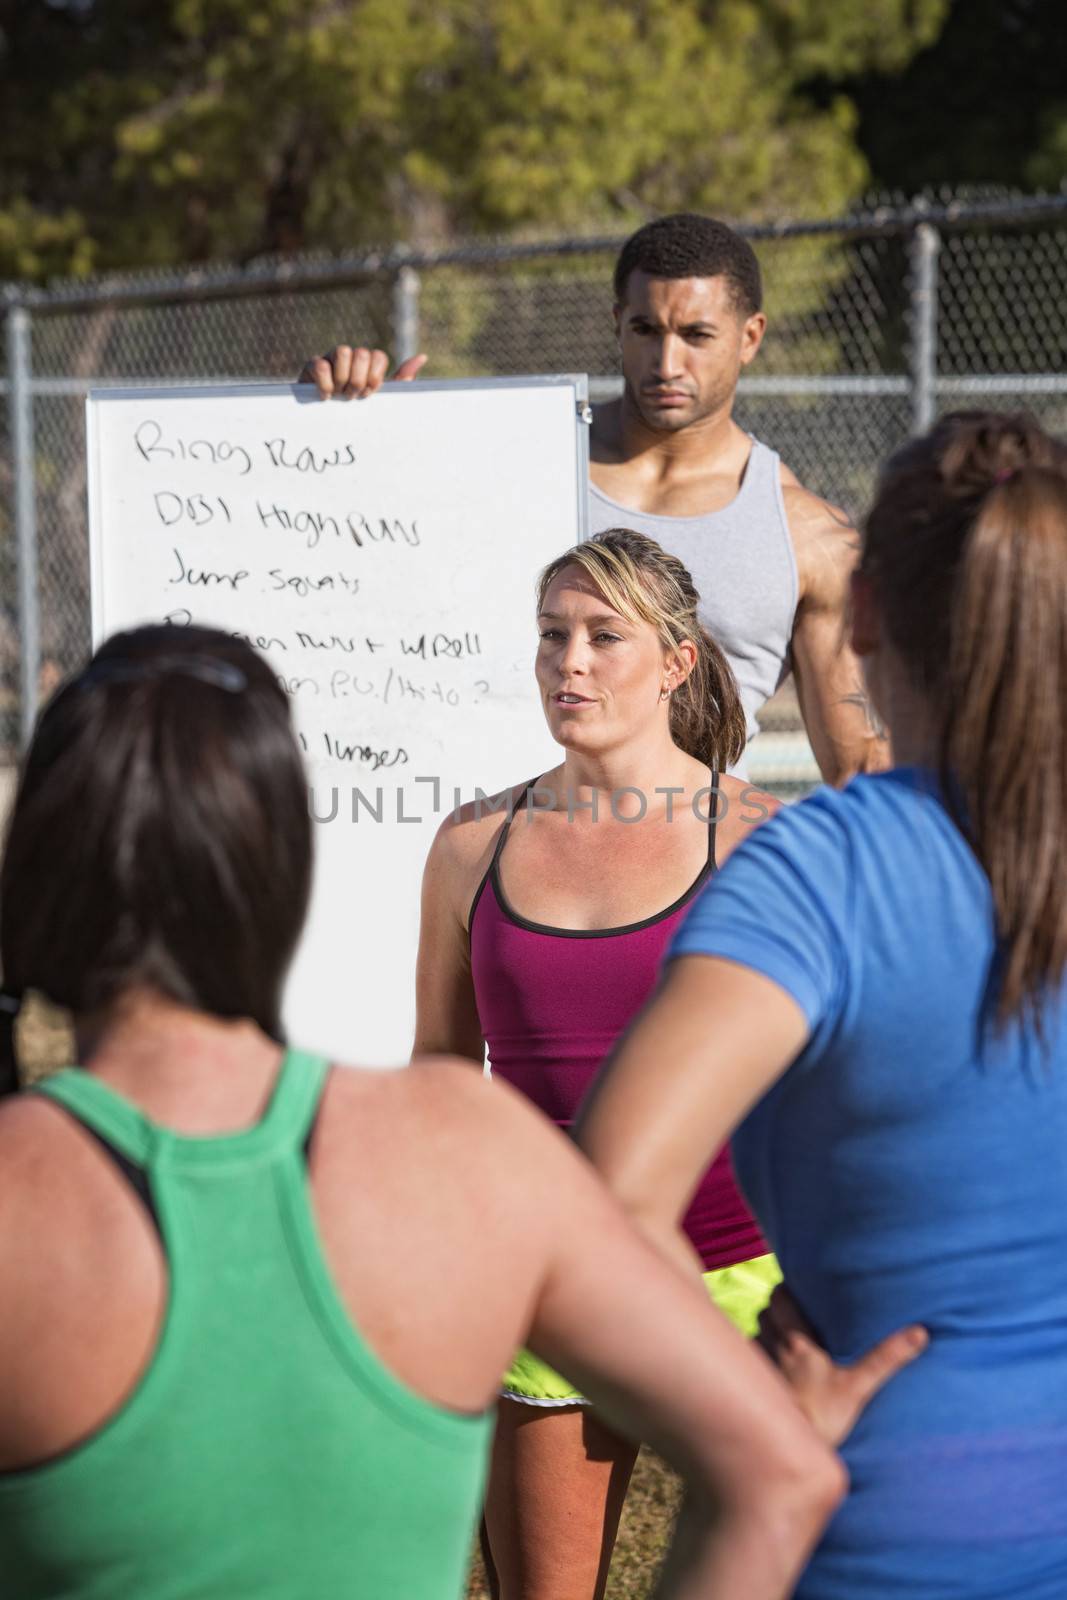 Fitness trainers explaining an exercise program outdoors